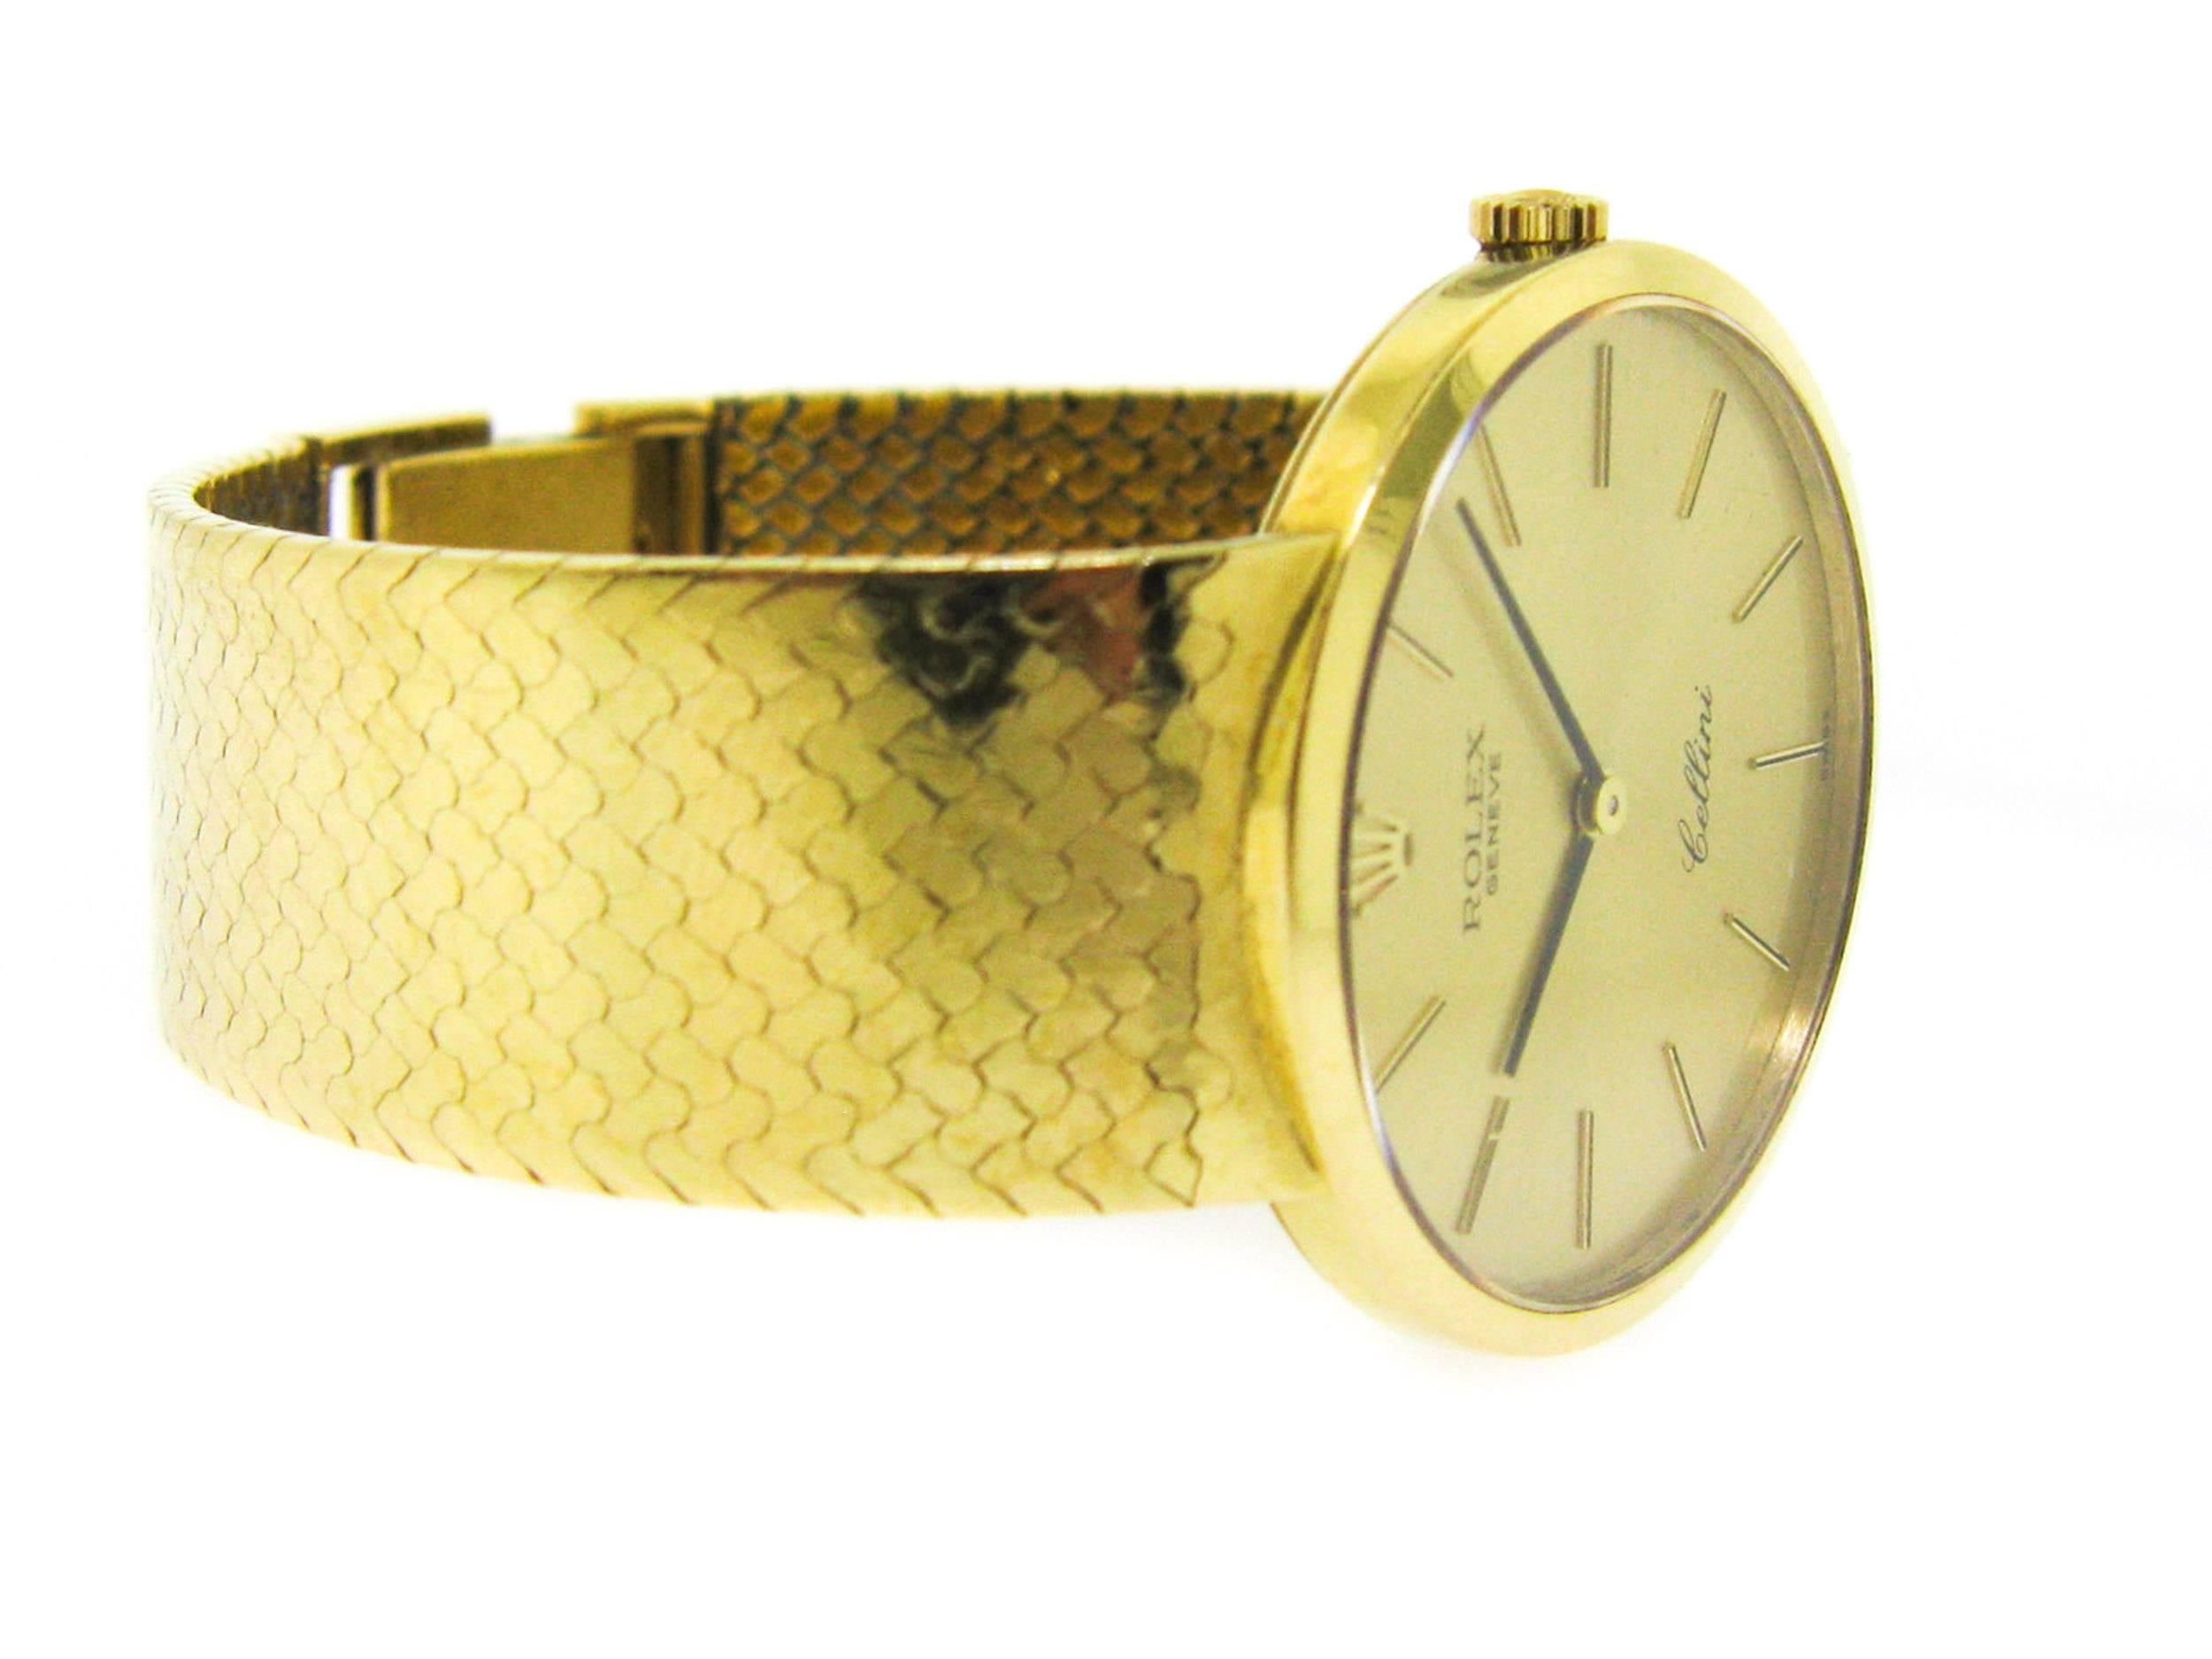 Rolex Cellini crafted in 18K Yellow Gold case 32mm and 7 inches long 18K Yellow Gold mesh Bracelet.  This timepiece features a manually wound movement with indications for the Hours and Minutes.  We have the timepiece only, no box or papers.